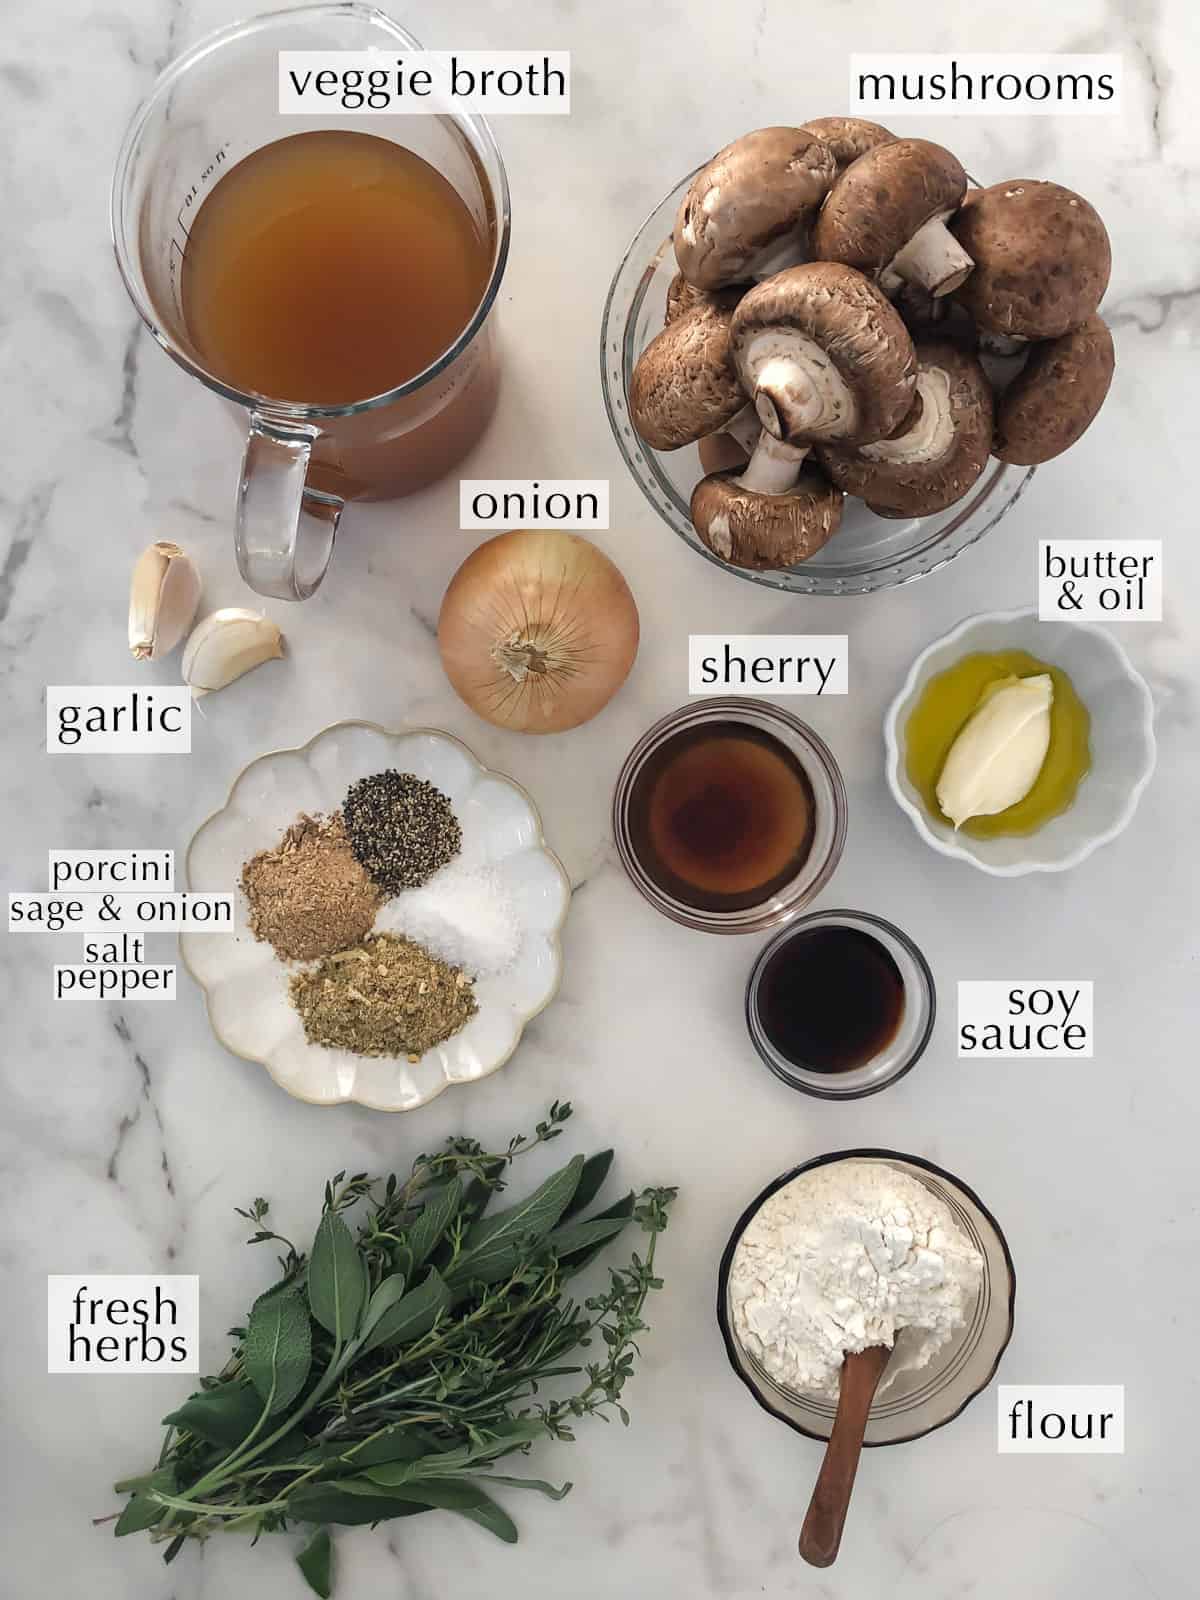 Ingredients for mushroom gravy in bowls on a counter.